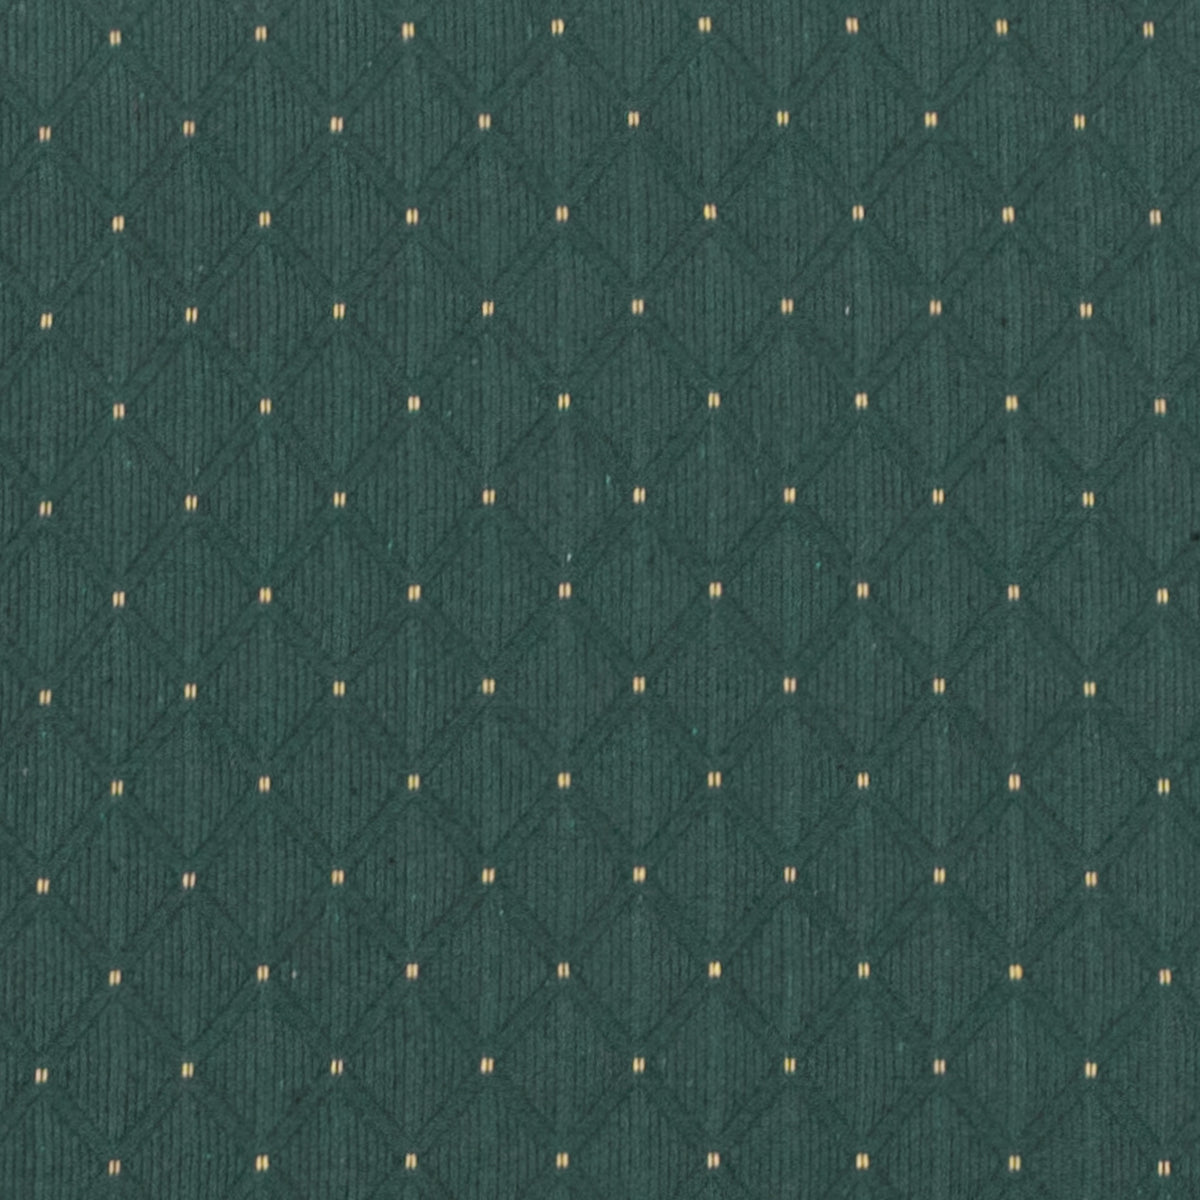 Hunter Green Dot Patterned Fabric/Gold Vein Frame |#| 21inchW Church Chair in Hunter Green Dot Patterned Fabric with Book Rack-Gold Frame